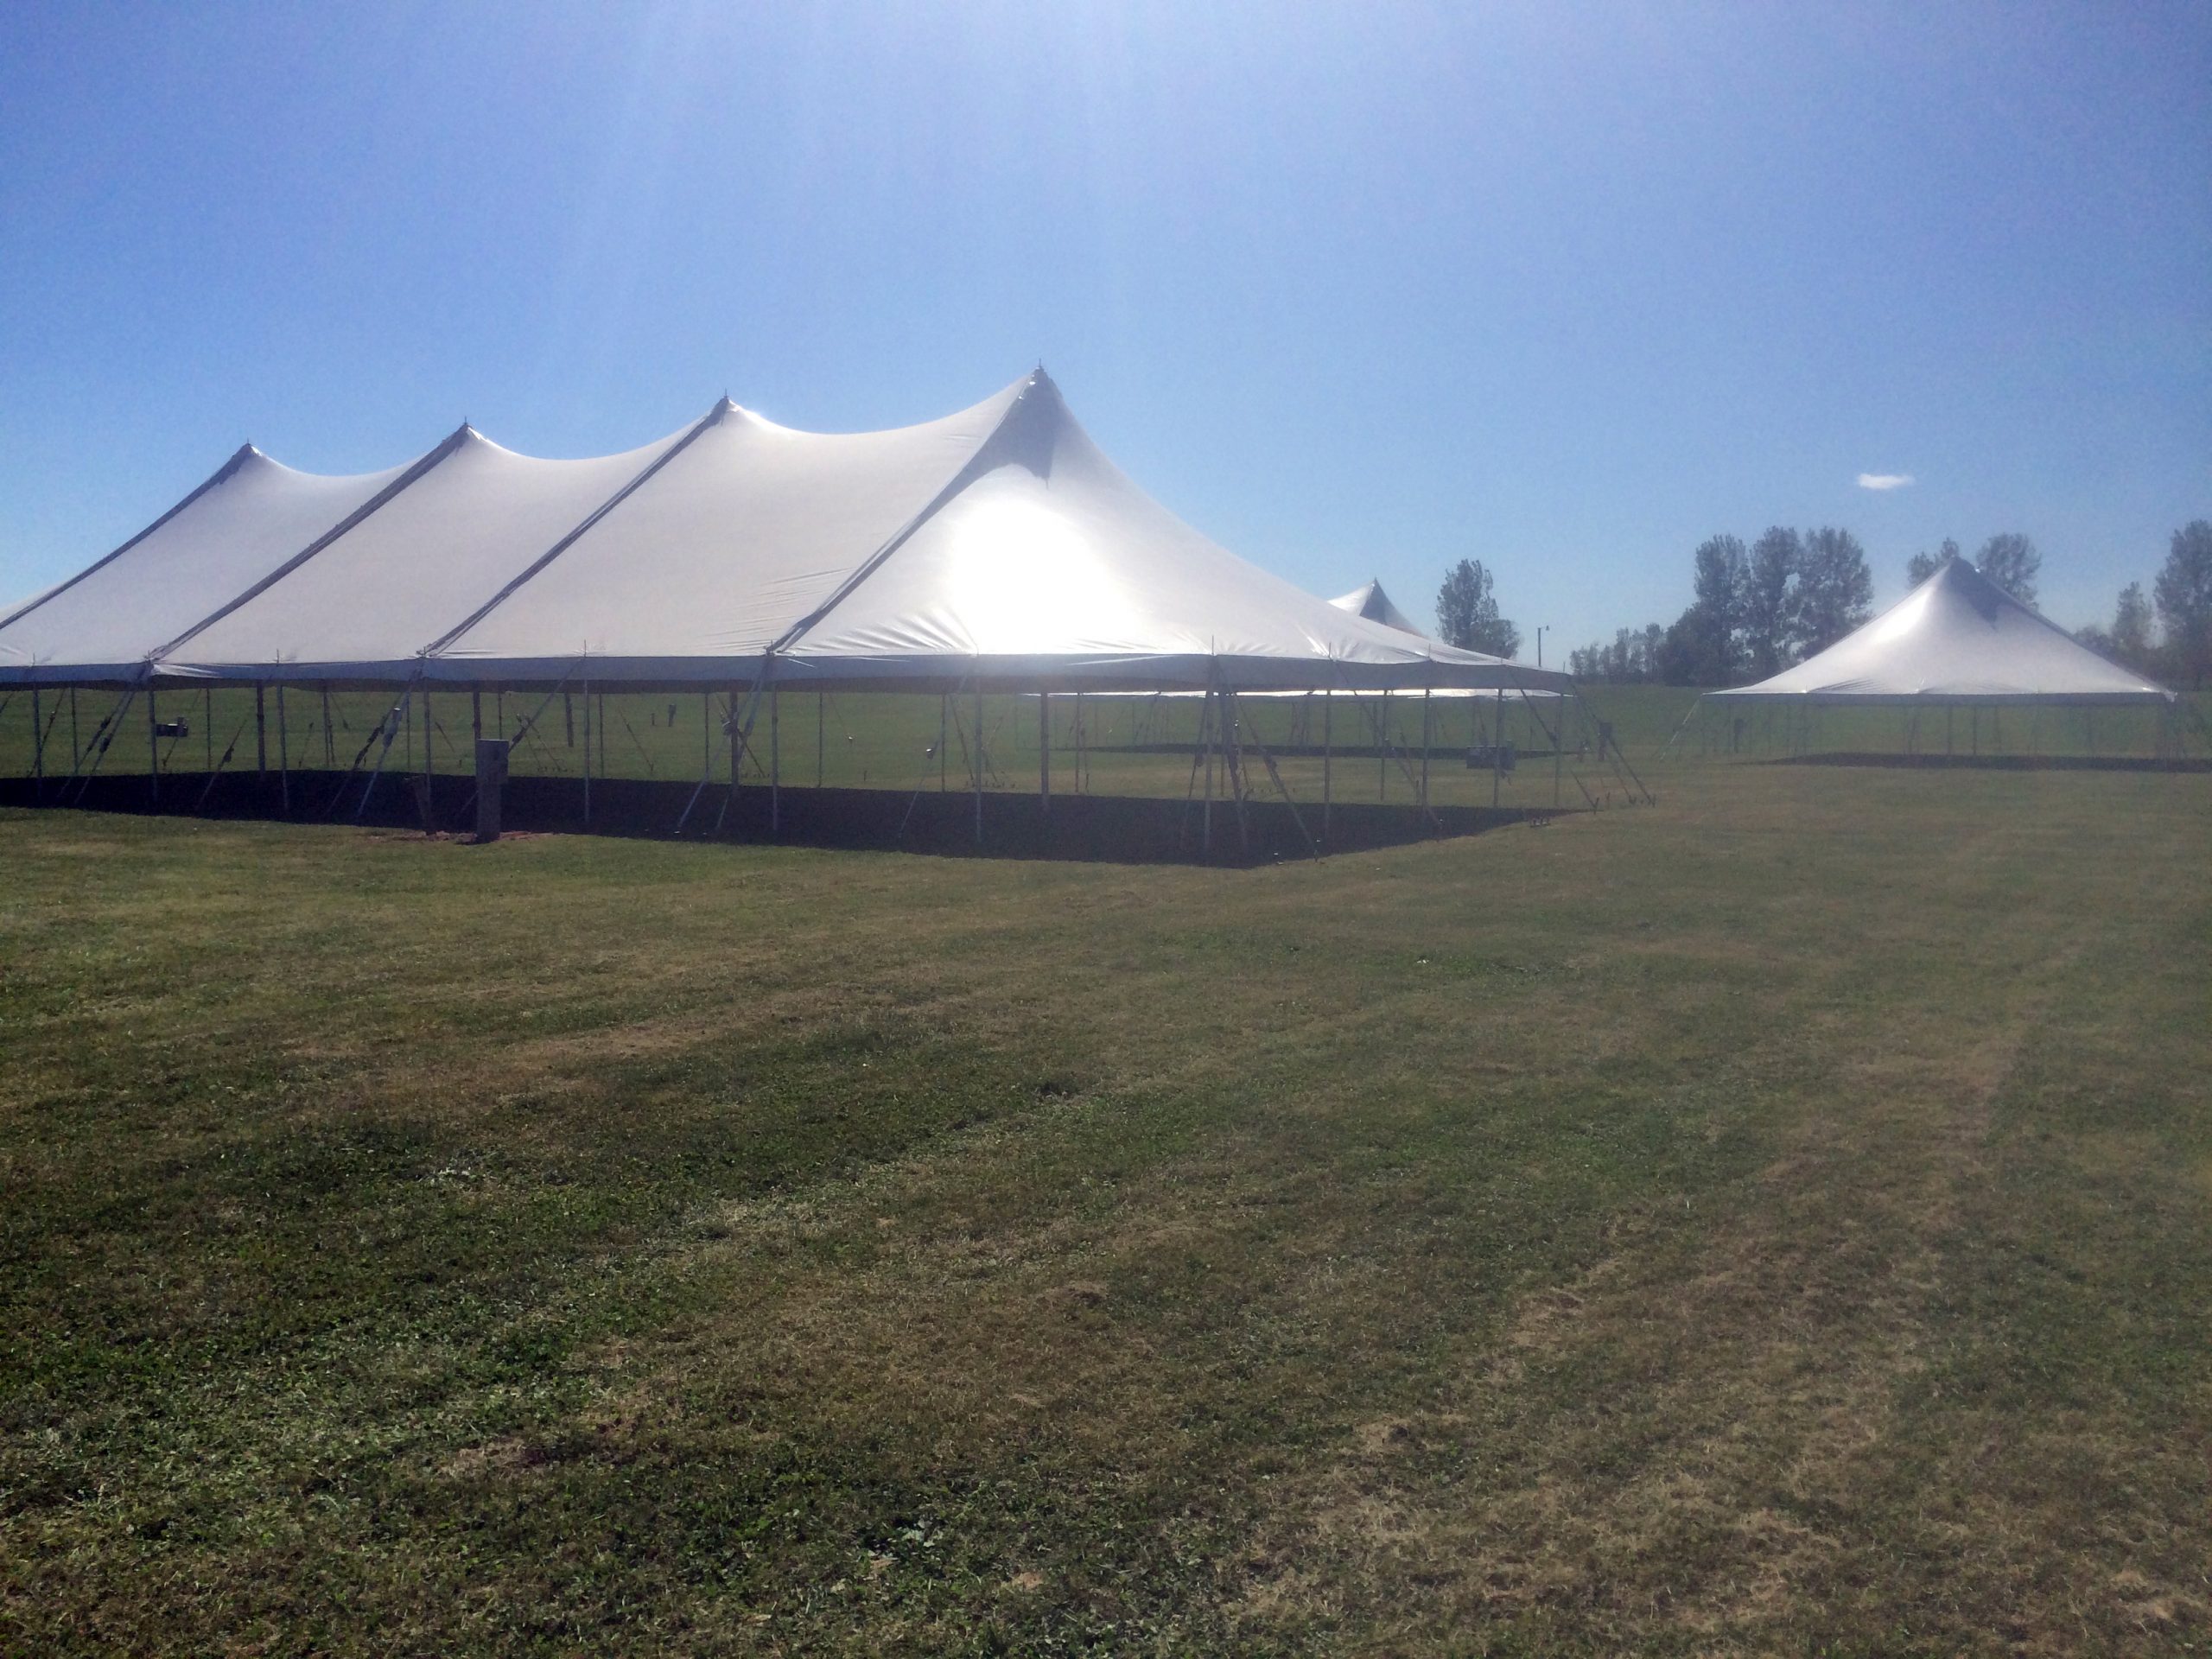 40′ x 100′, 20′ x 40′ and 40′ x 60′ rope and pole tents in Amana Colonies